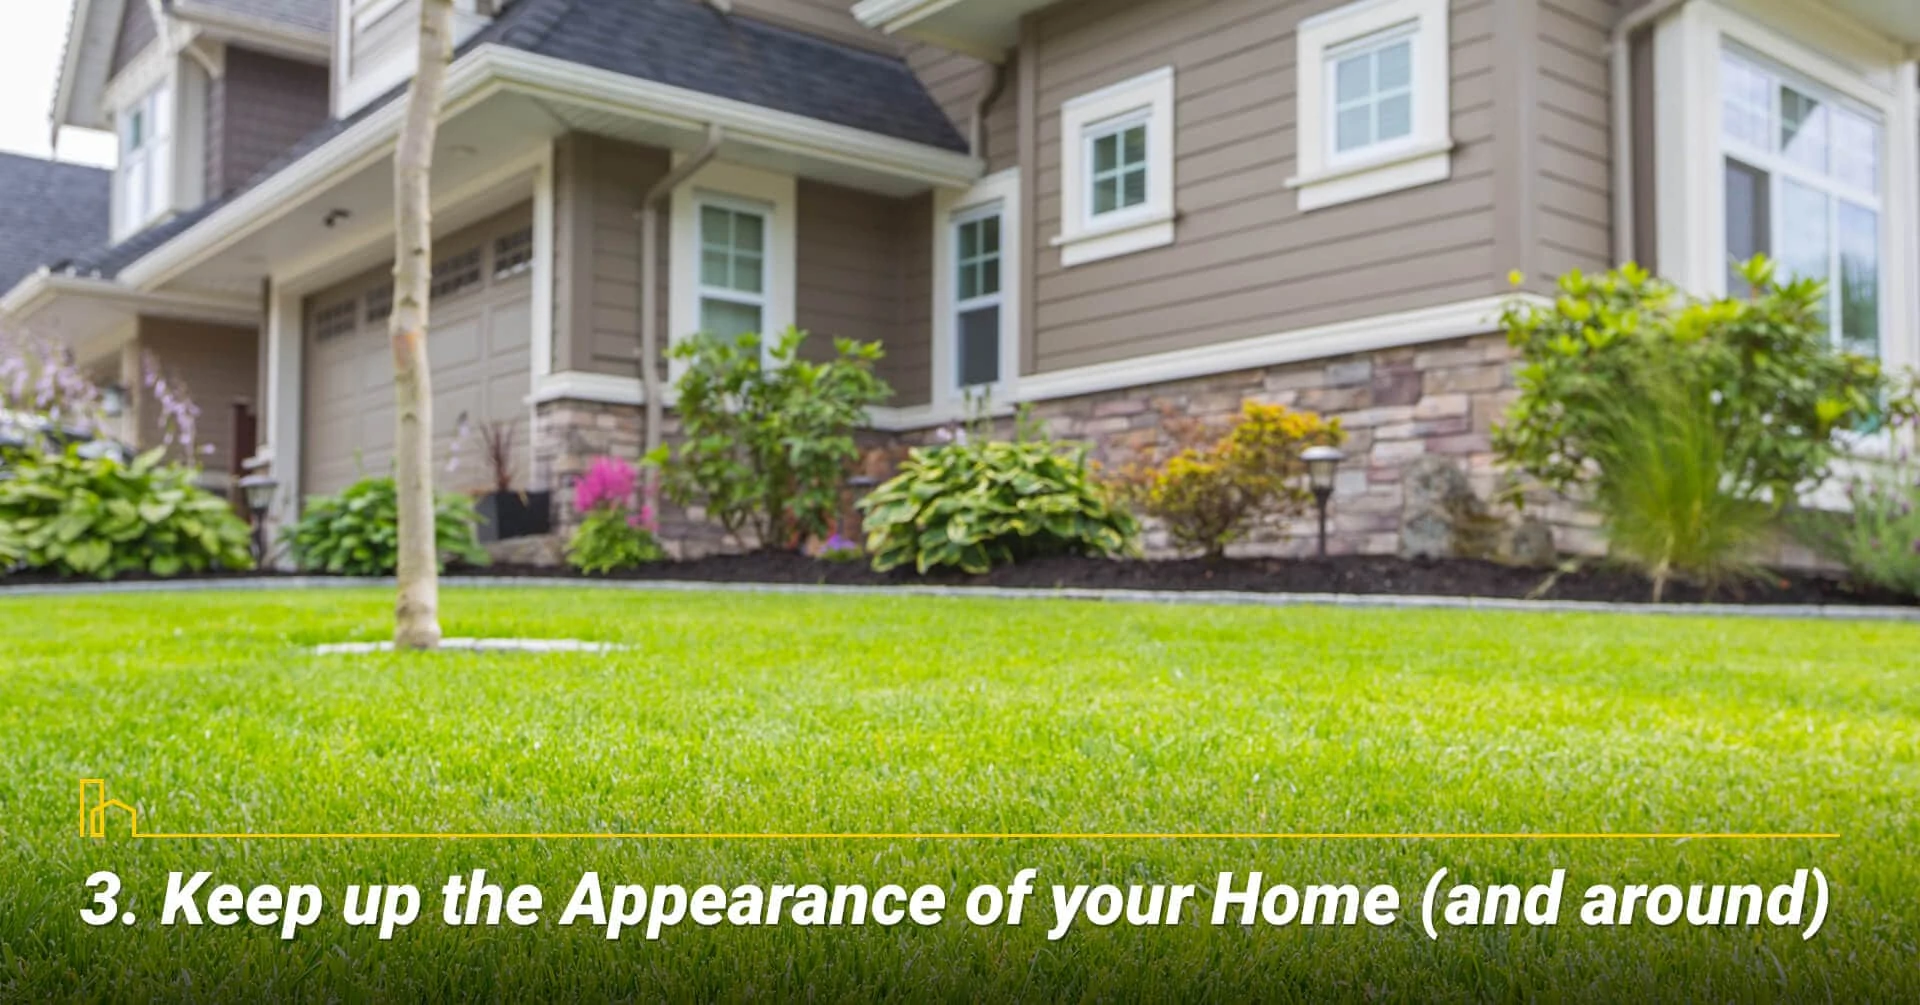 Keep up the Appearance of your Home (and around), maintain your home in good condition